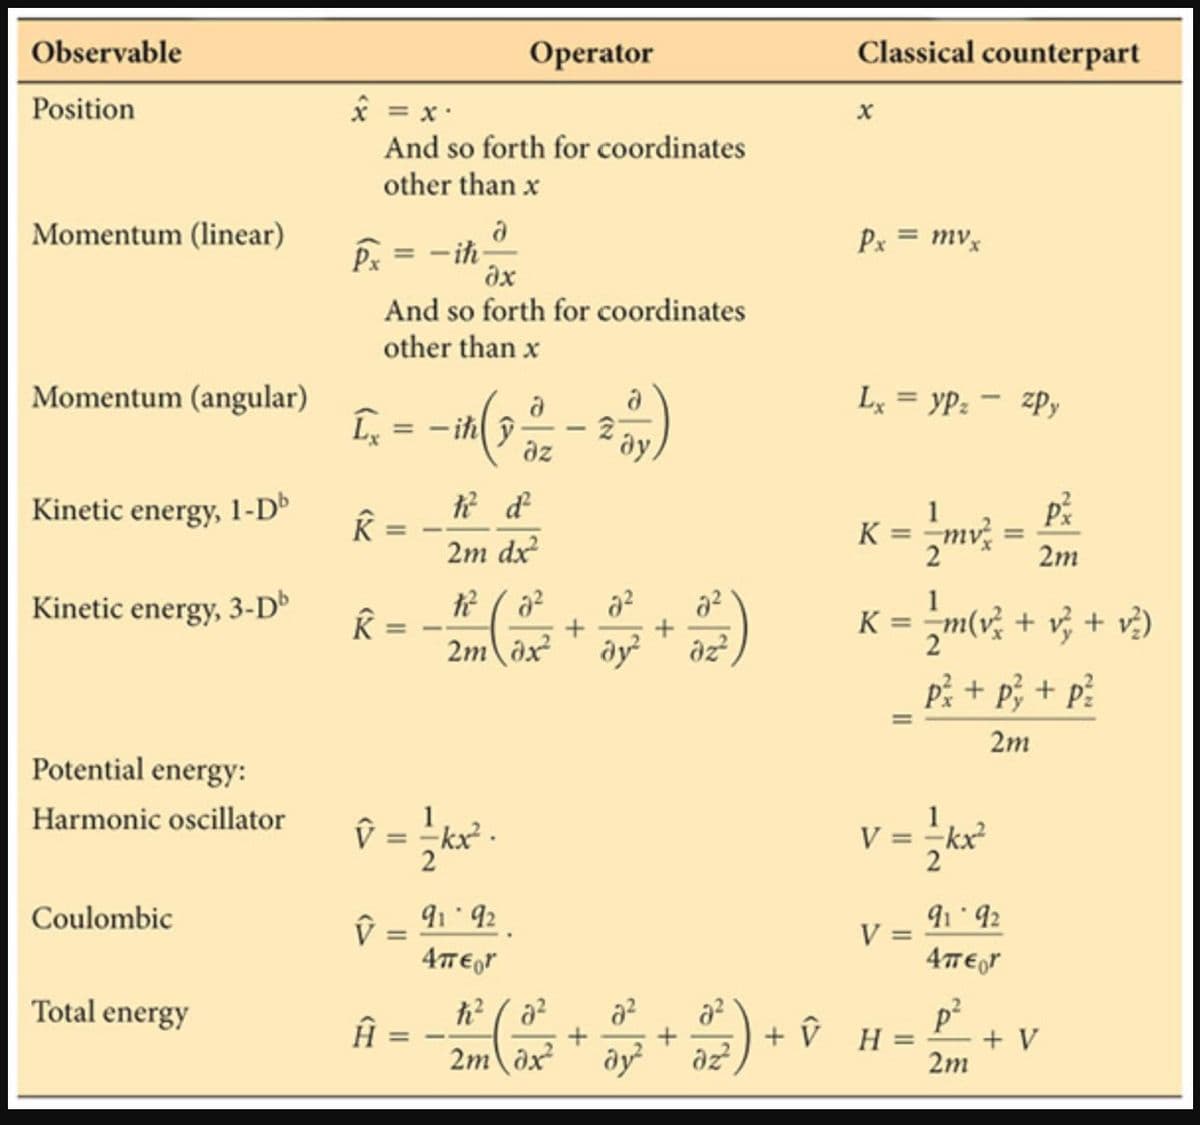 Observable
Operator
Classical counterpart
Position
x = x:
And so forth for coordinates
other than x
Momentum (linear)
Px = mvx
Px = -ih-
And so forth for coordinates
other than x
Momentum (angular)
Lx = yP: - zPy
I, = - ih ŷ
az
mi -
K = =mv;
Kinetic energy, 1-D
%3D
K =
2m dx
2m
Kinetic energy, 3-D
+ v, + v)
%3D
+
2m ax
dy az,
pi + p; + p?
2m
Potential energy:
Harmonic oscillator
kx².
V = -kx
%3D
Coulombic
91 92
91 92
V =
%3D
4TEor
h? ( a?
ay
Total energy
+ V H=
2m
P + V
2m ax
az
